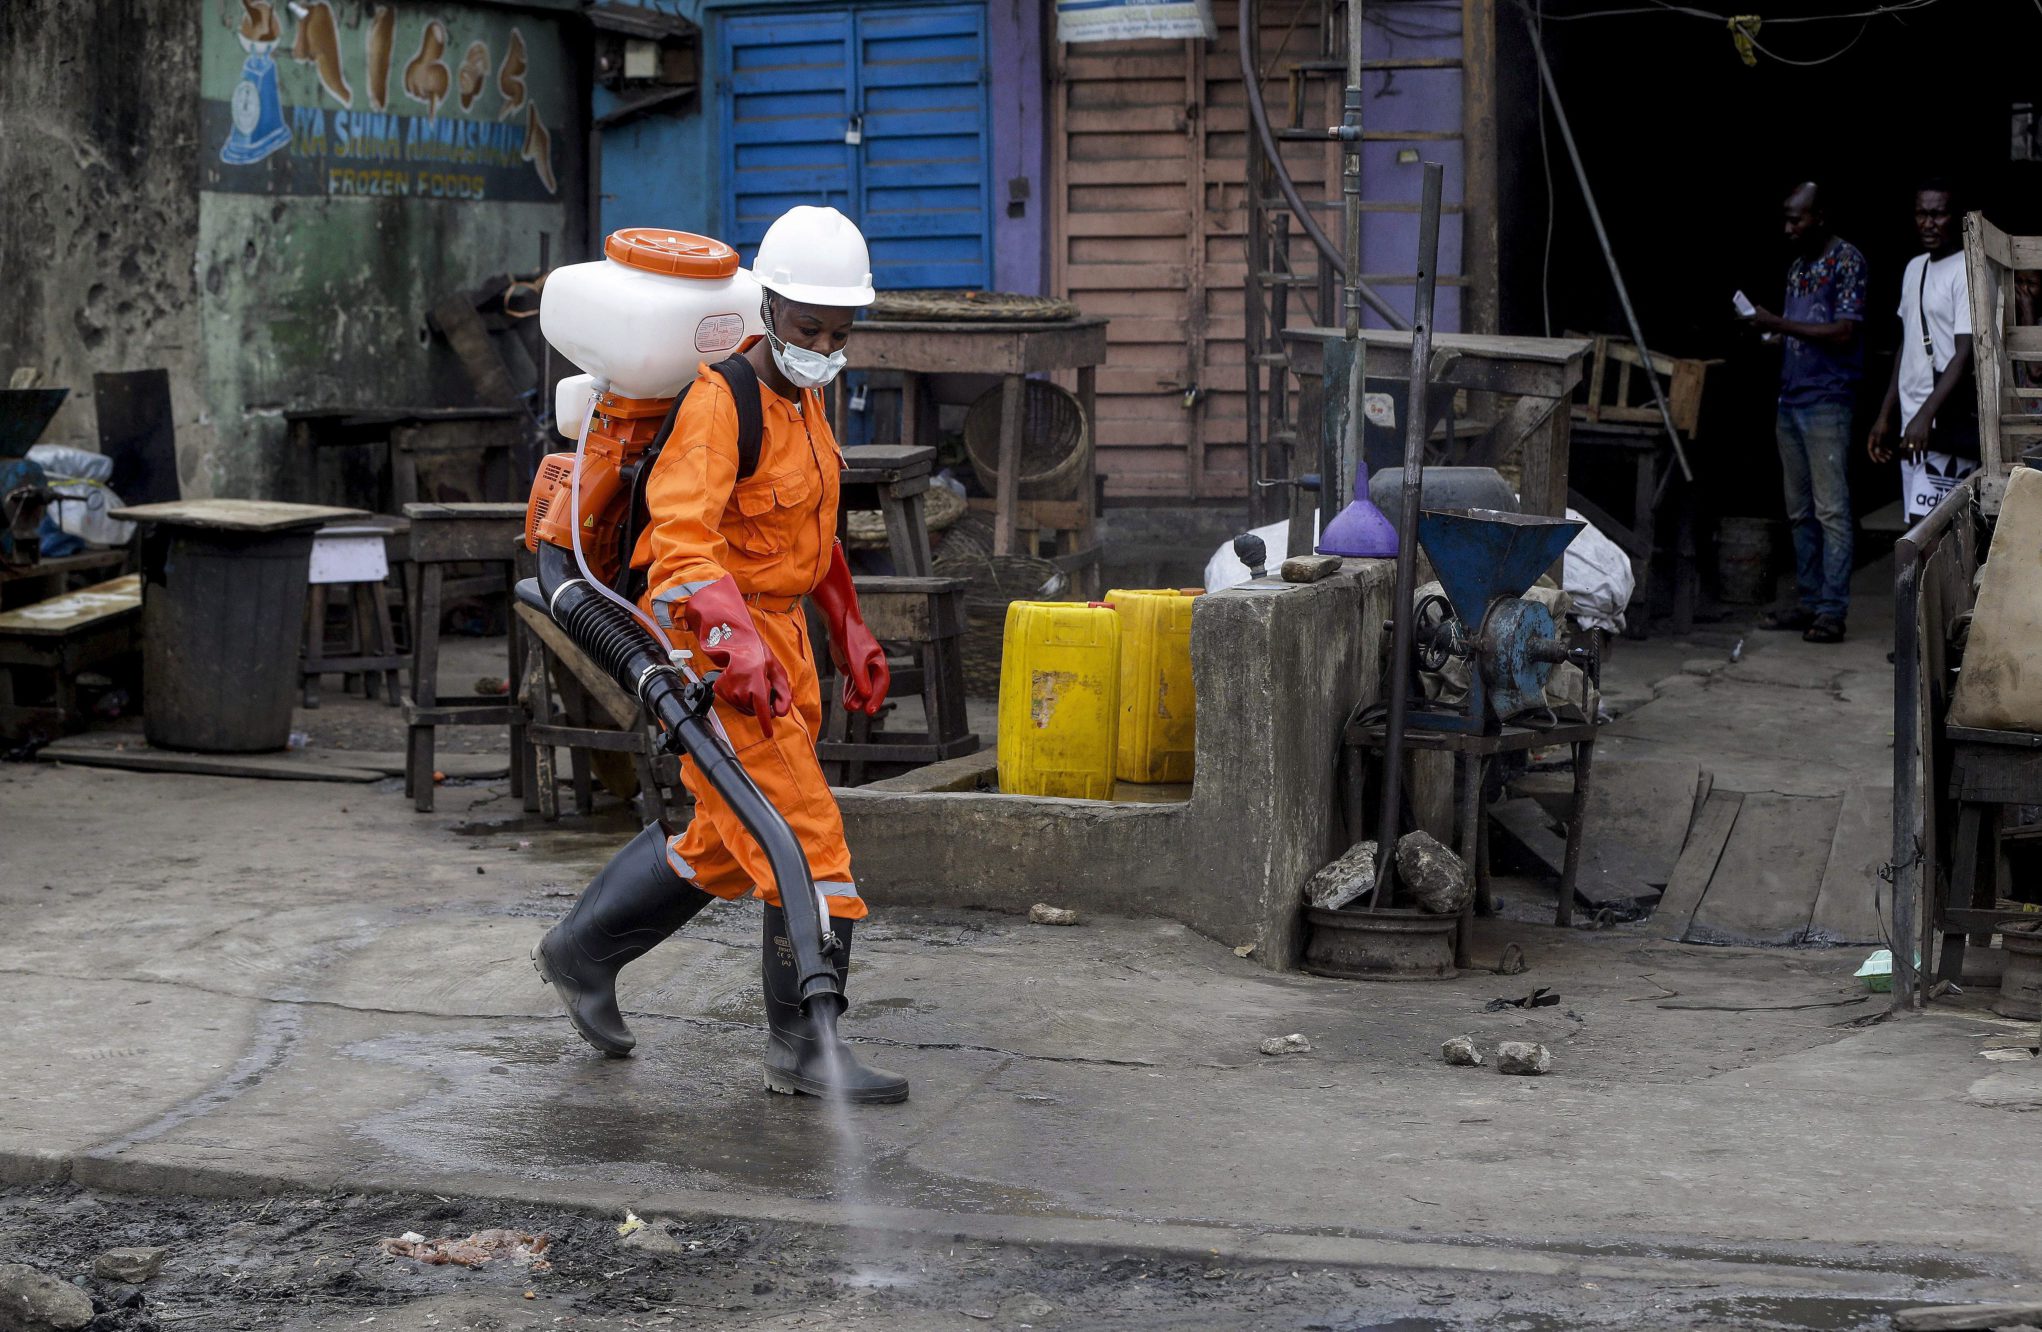 A health worker sprays disinfectant in an informal roadside market, in an attempt to halt the spread of COVID-19, in Lagos, Nigeria.